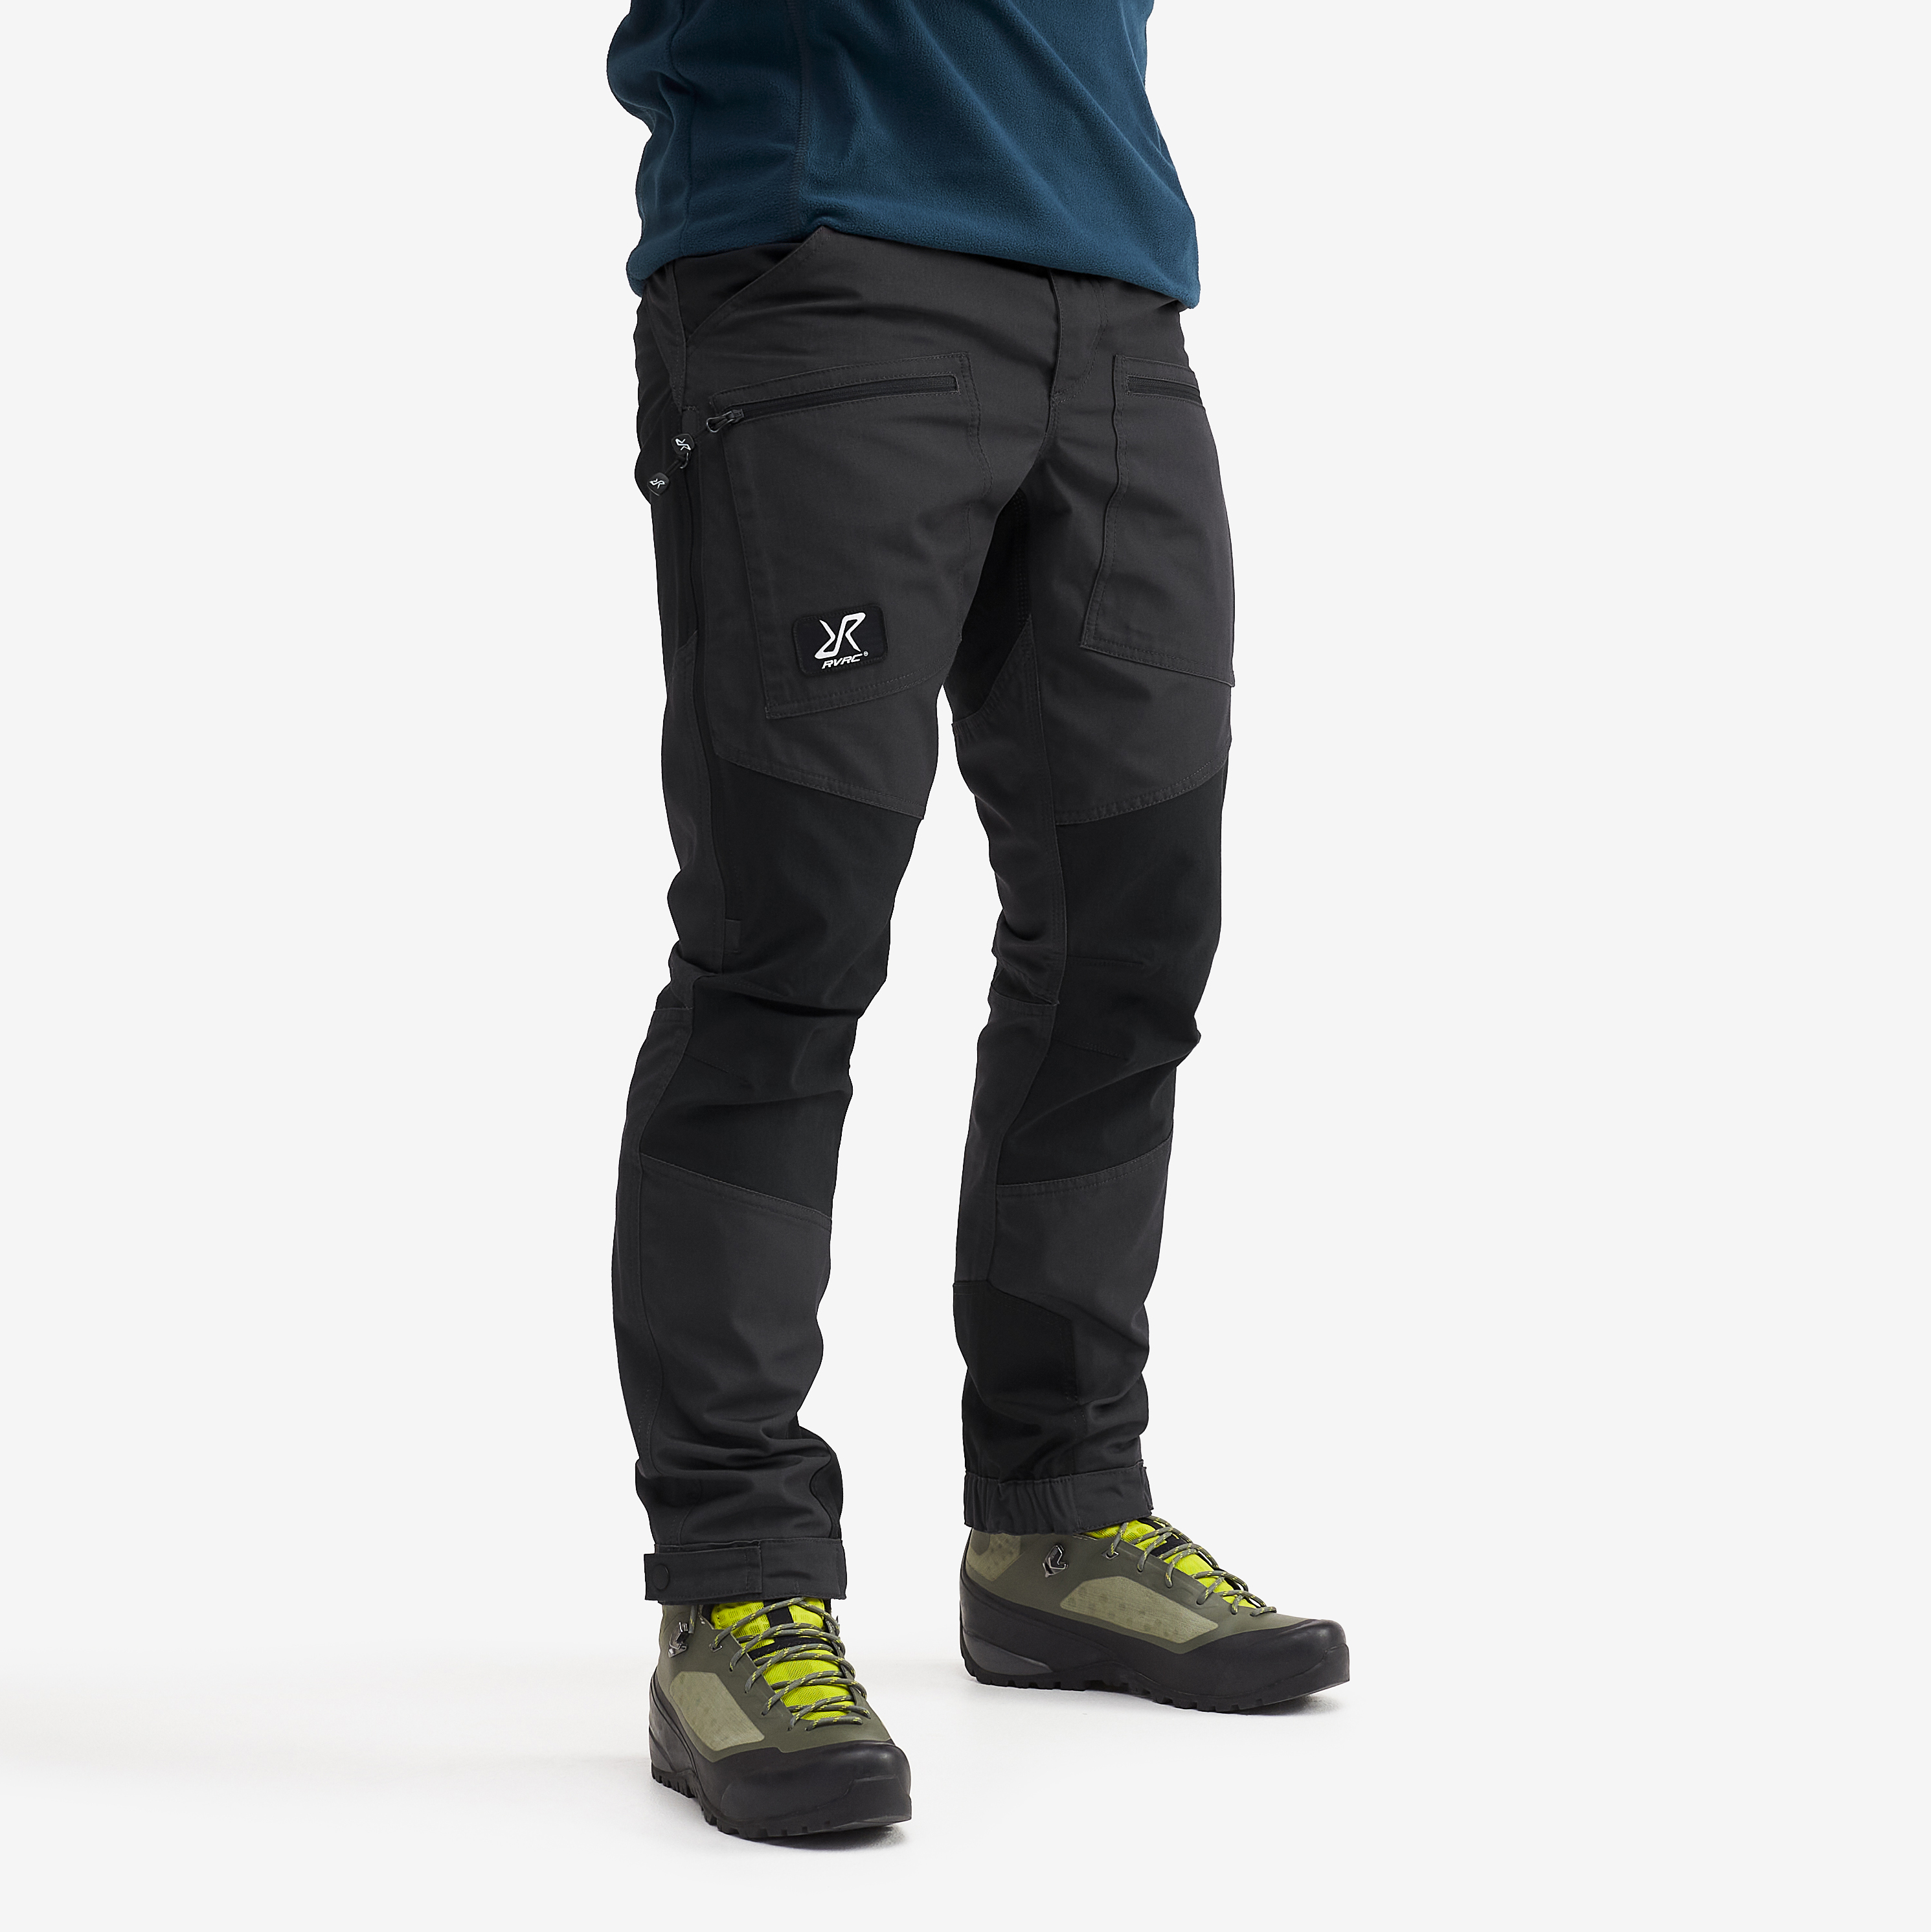 Nordwand Pro Short hiking pants for men in dark grey